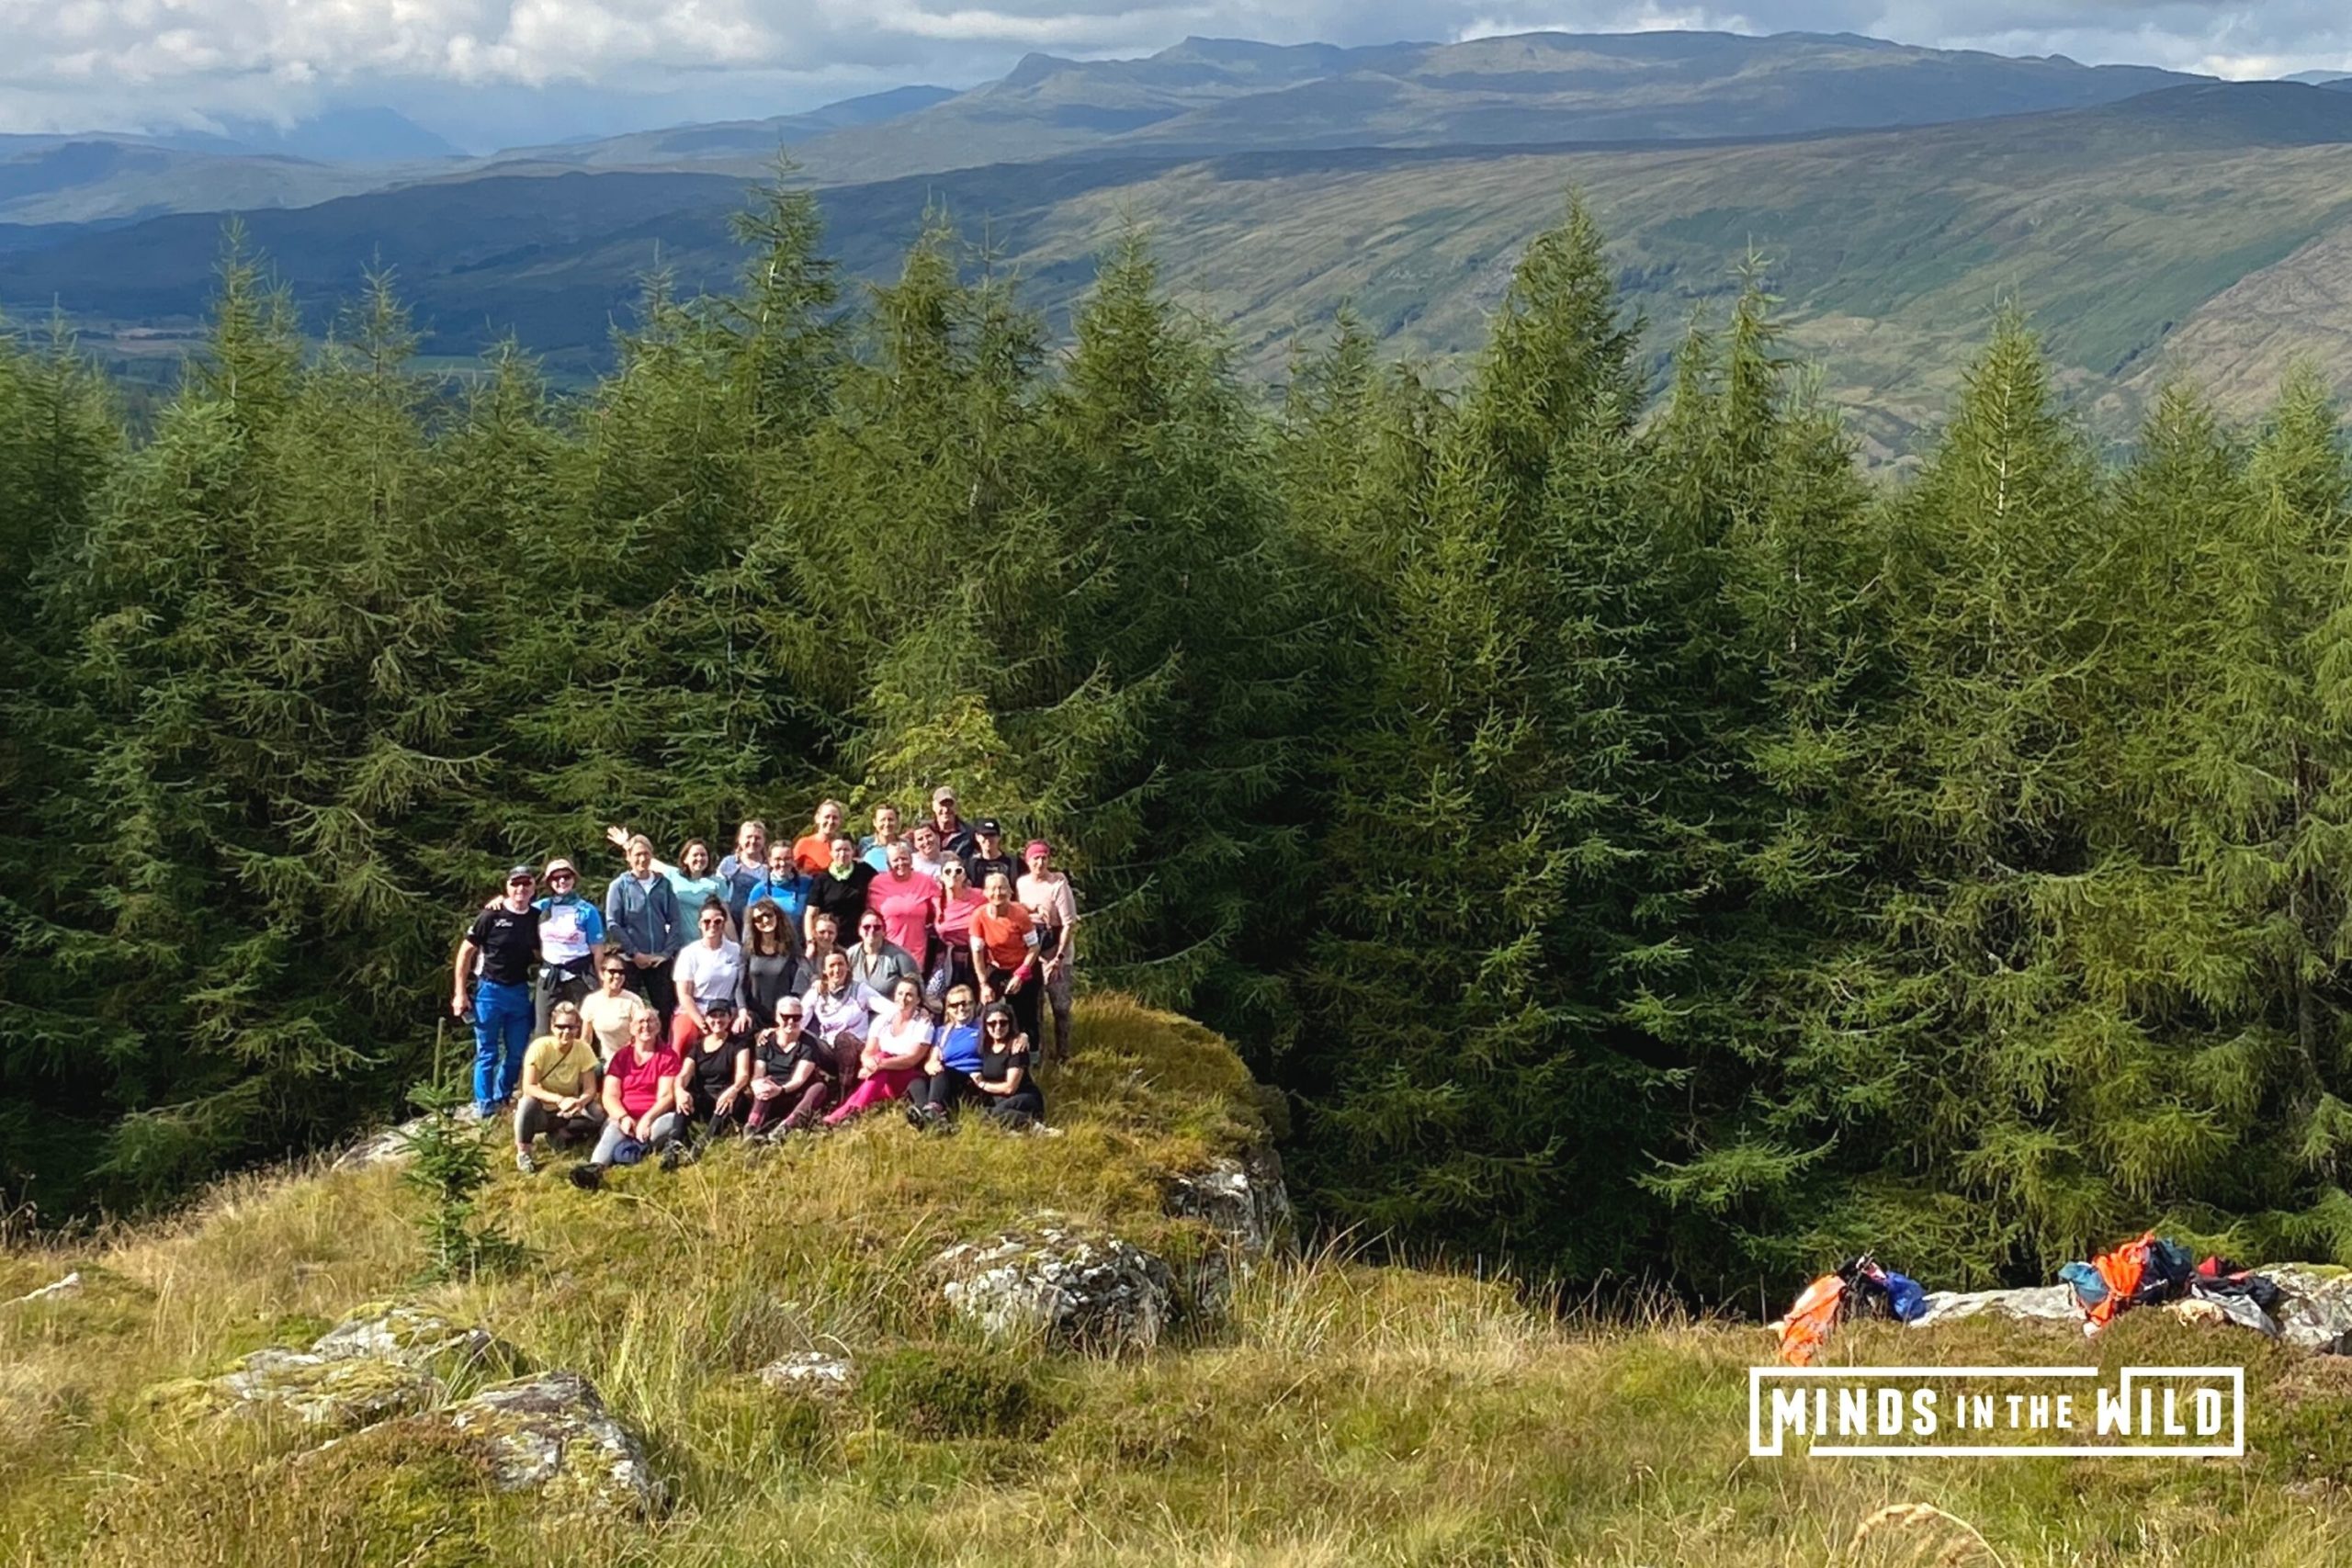 New Minds In The Wild Scottish Highlands Challenge Brings Teams Together Around Wellbeing